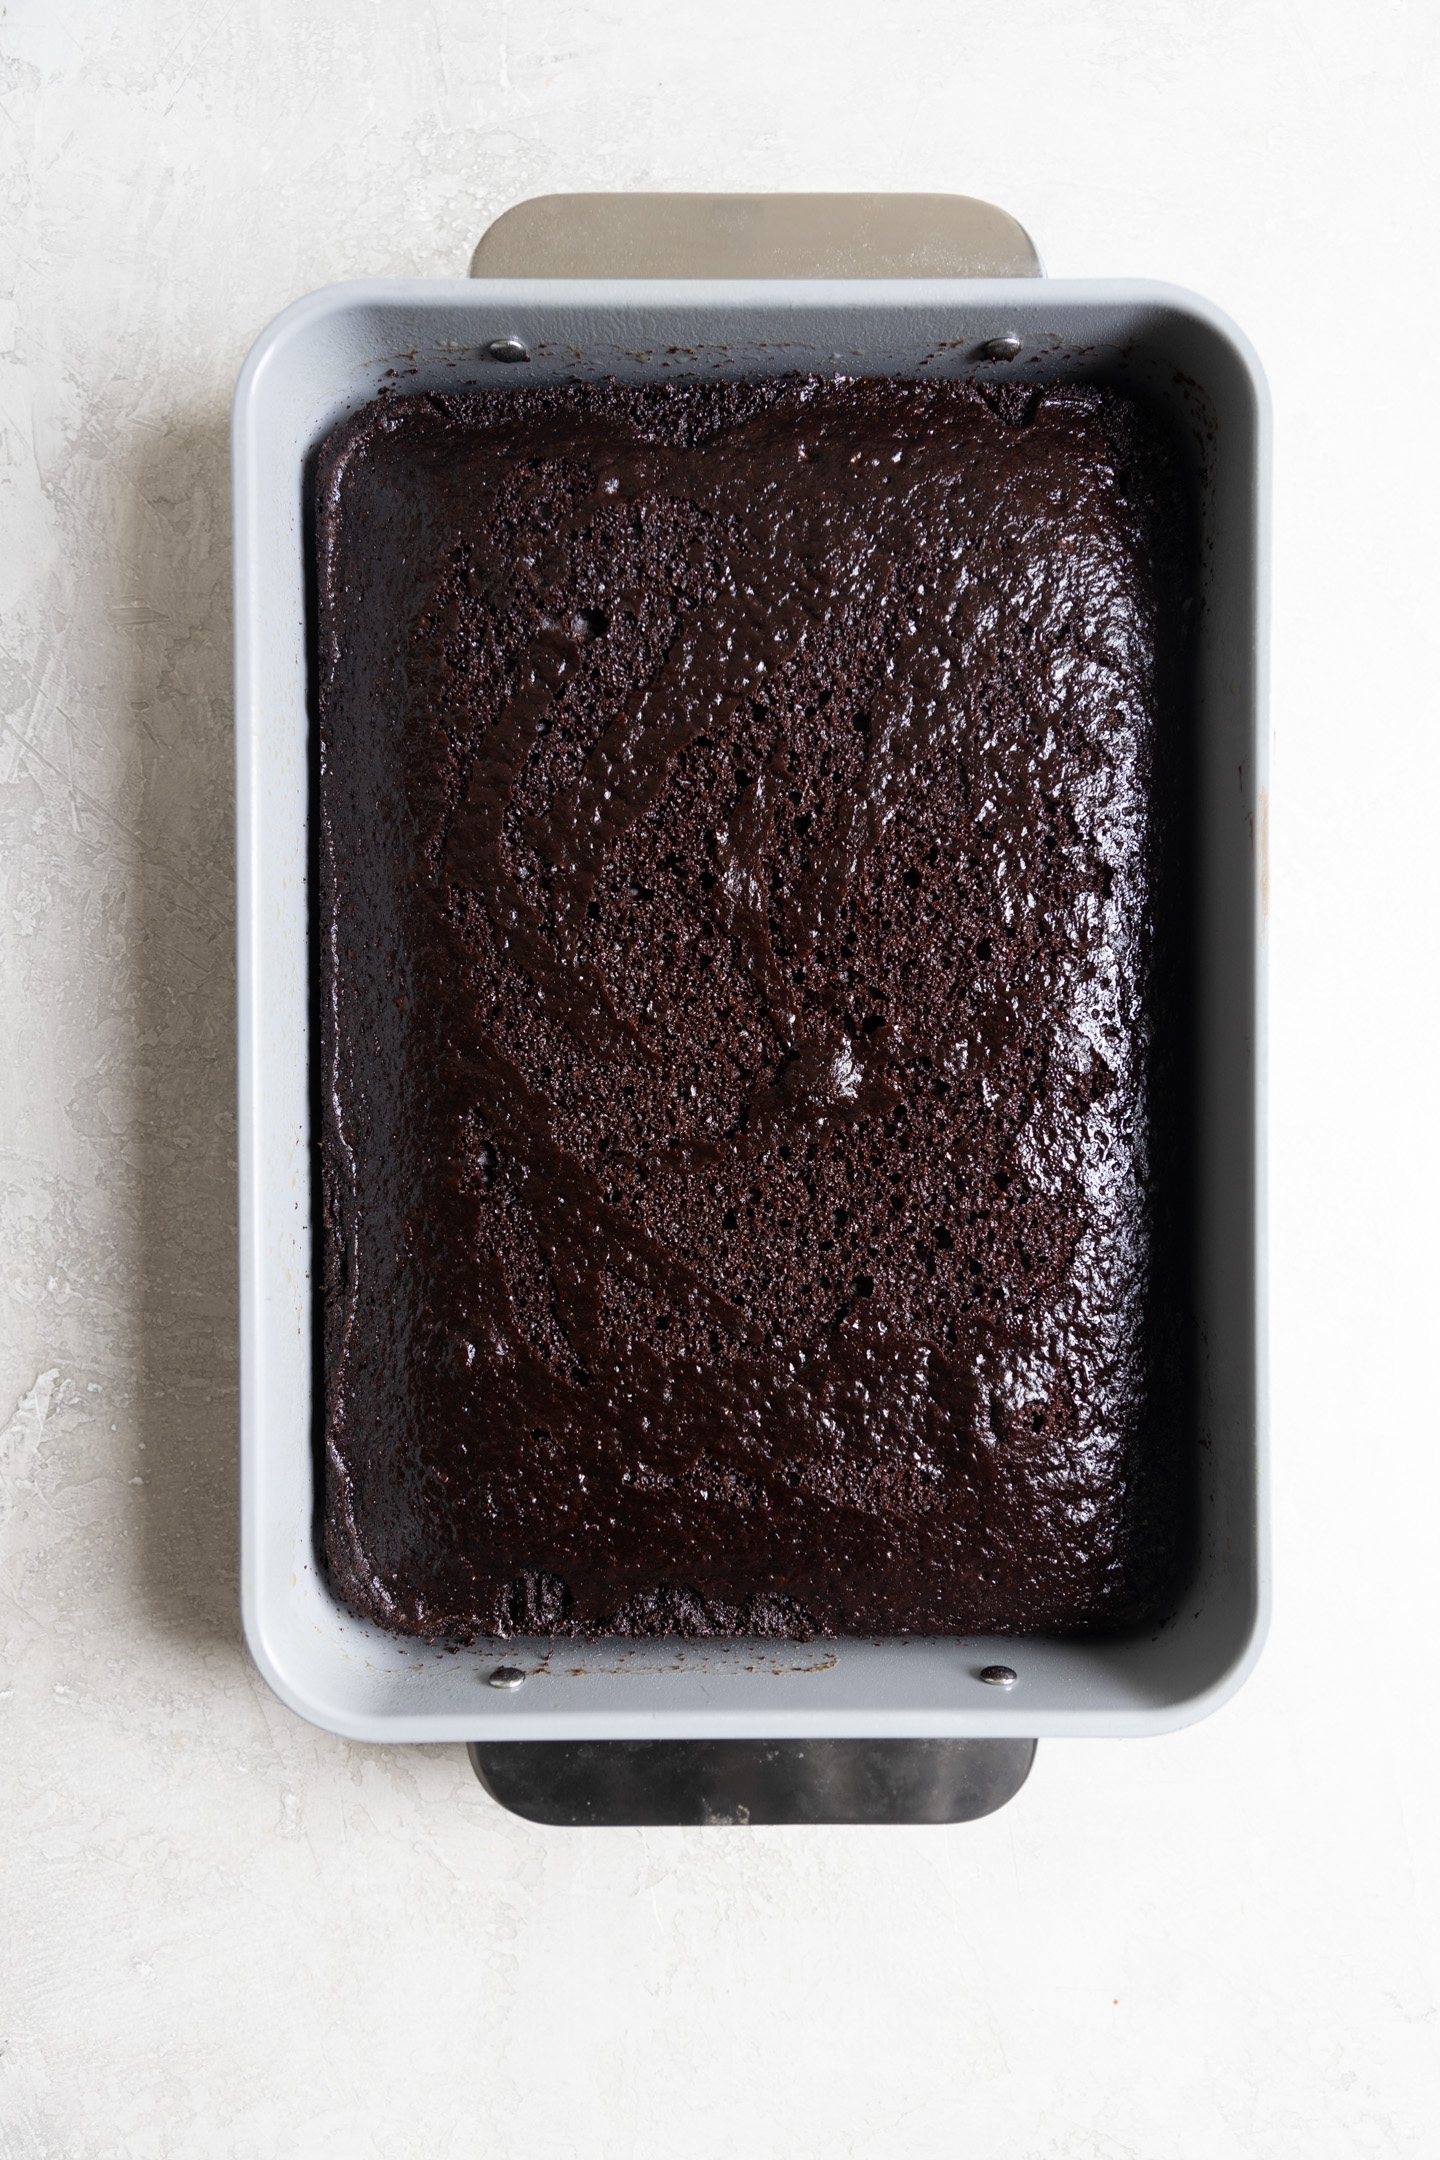 A chocolate cake in a 9x13 pan.